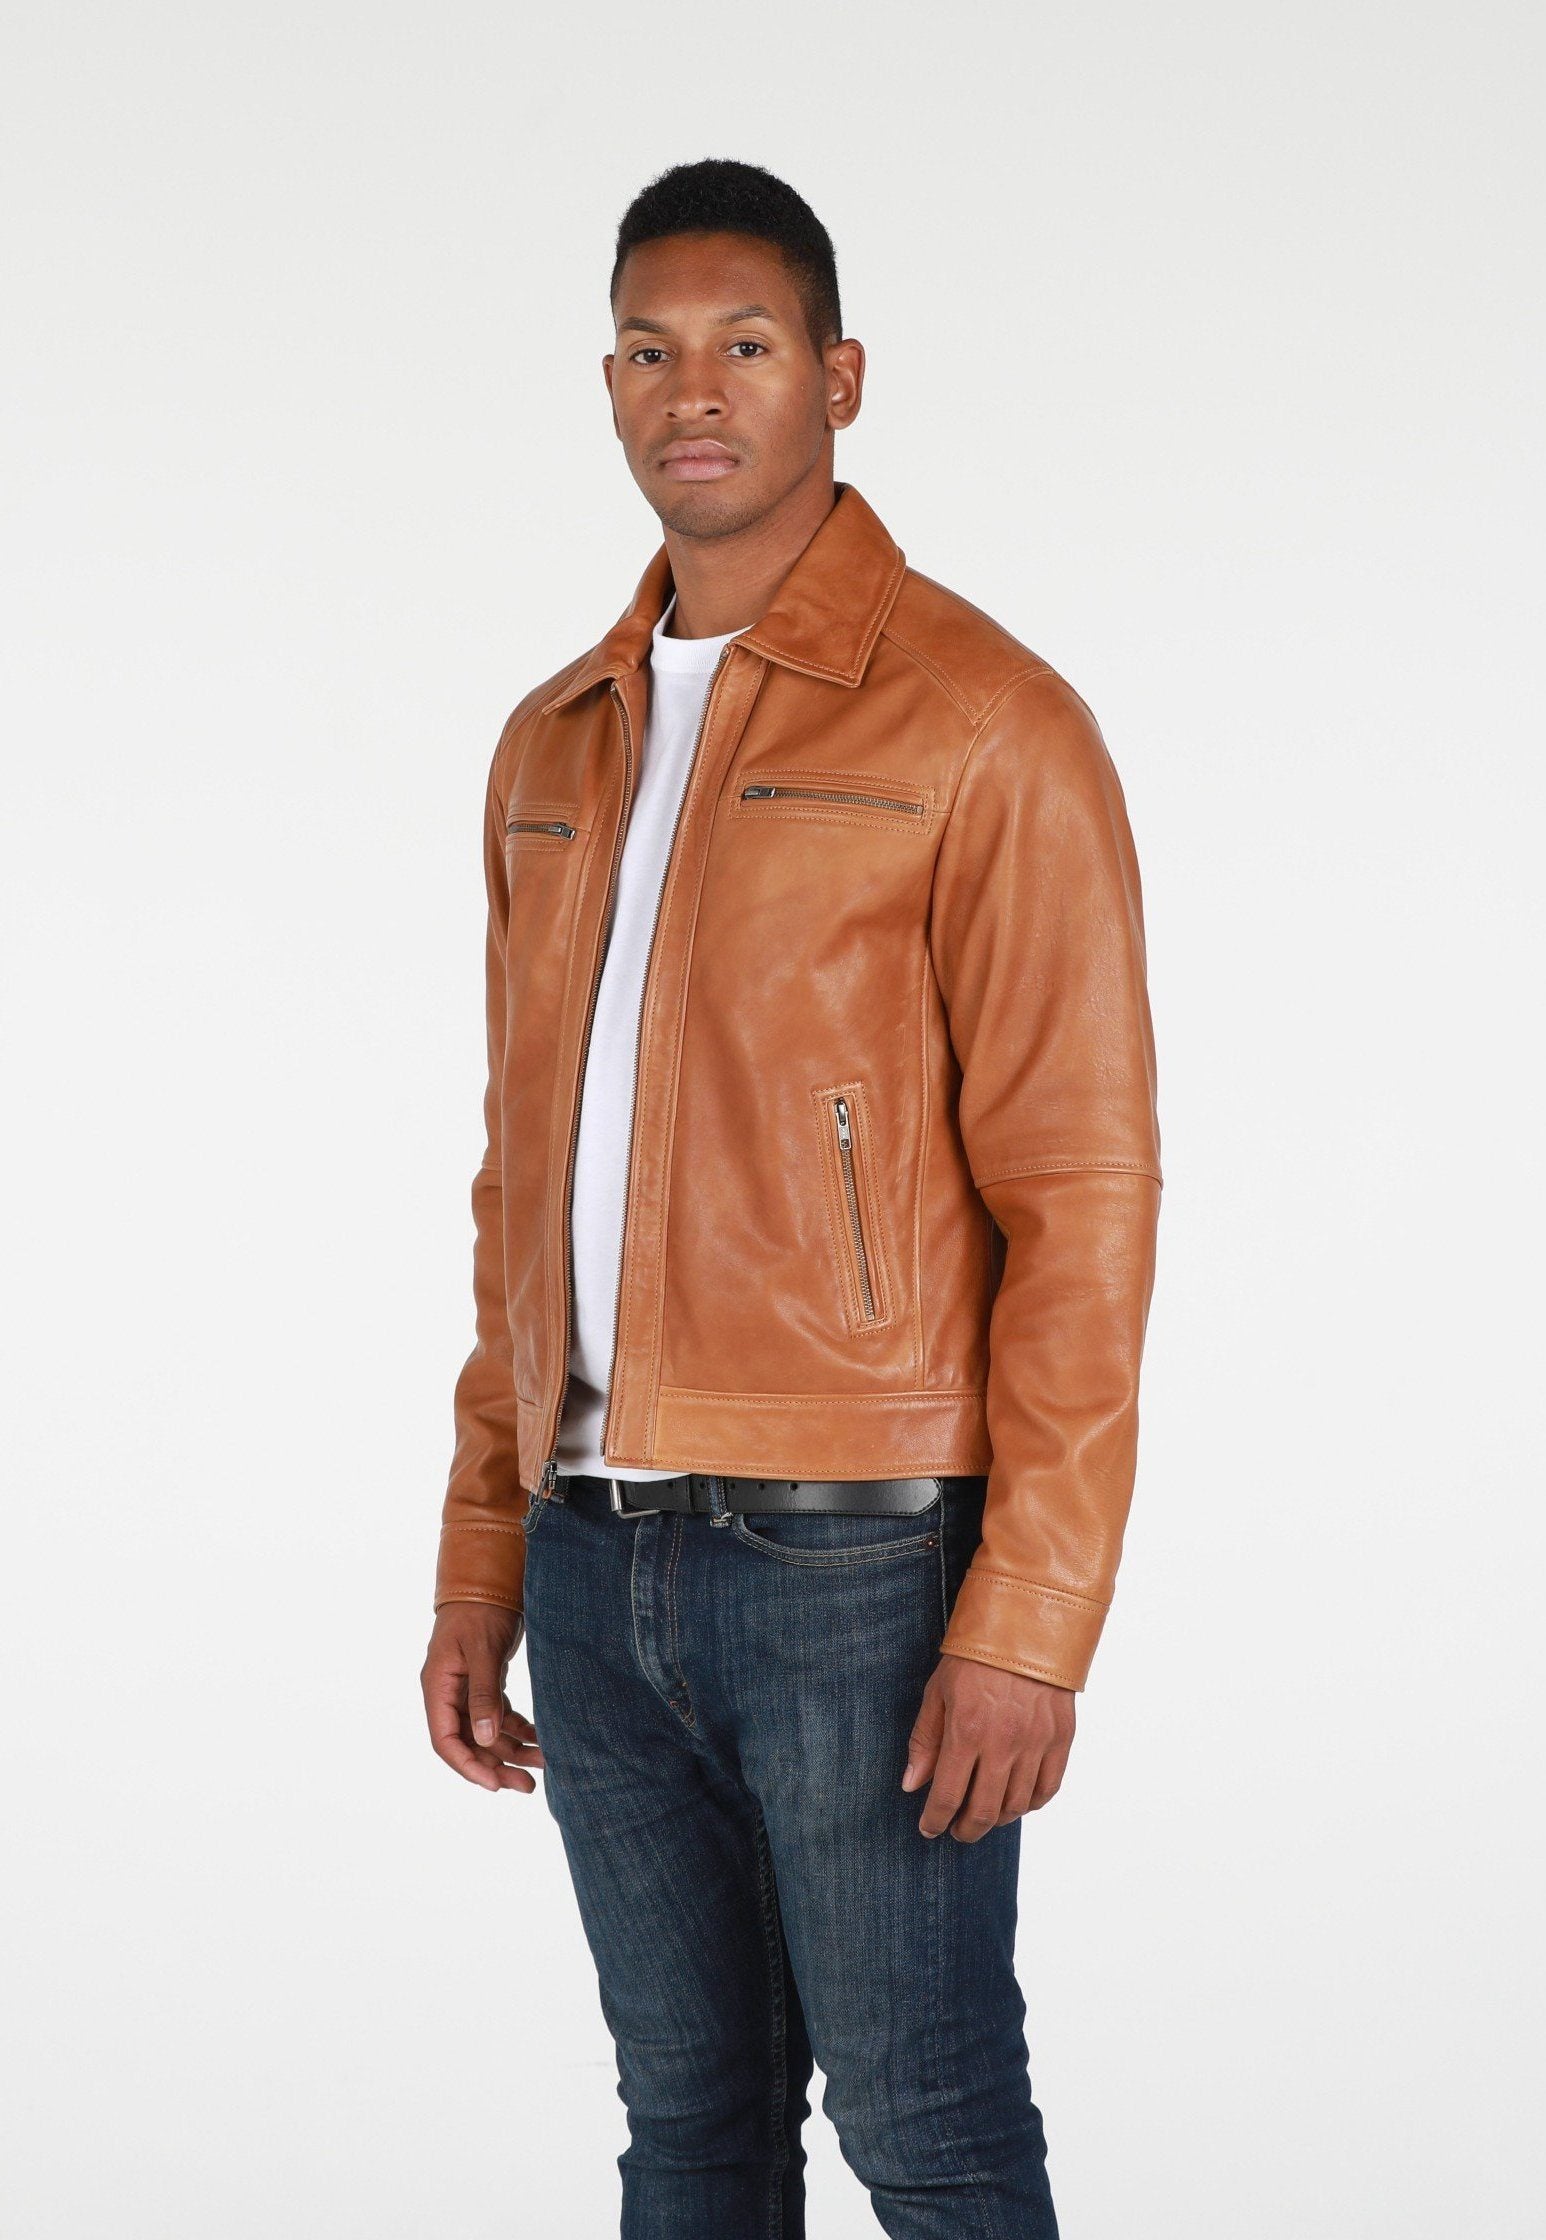 Brown Color leather jacket for sale | Mumbai | India